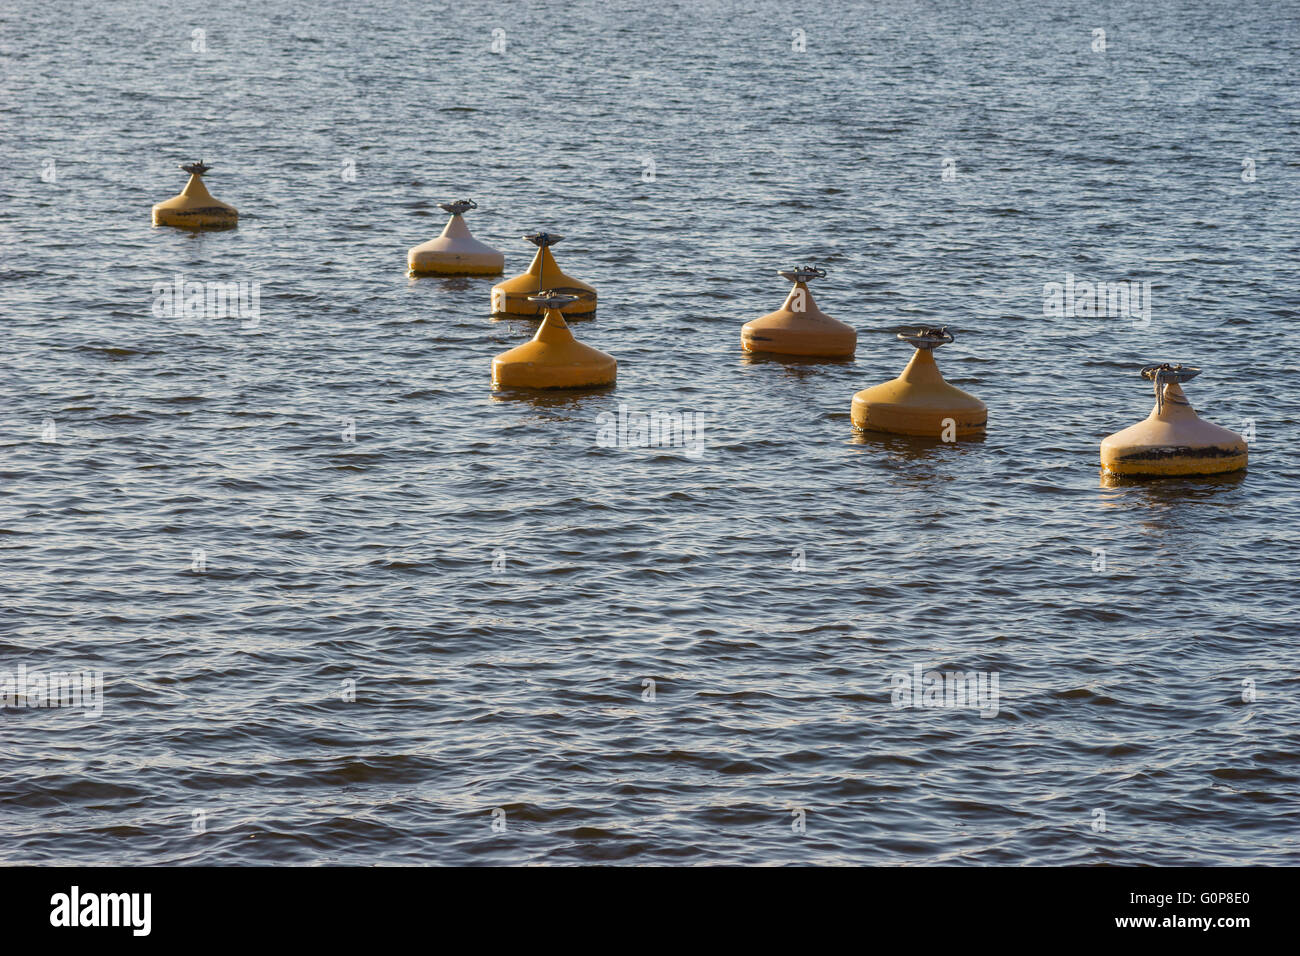 Many of yellow metal buoys floating in sea water Stock Photo